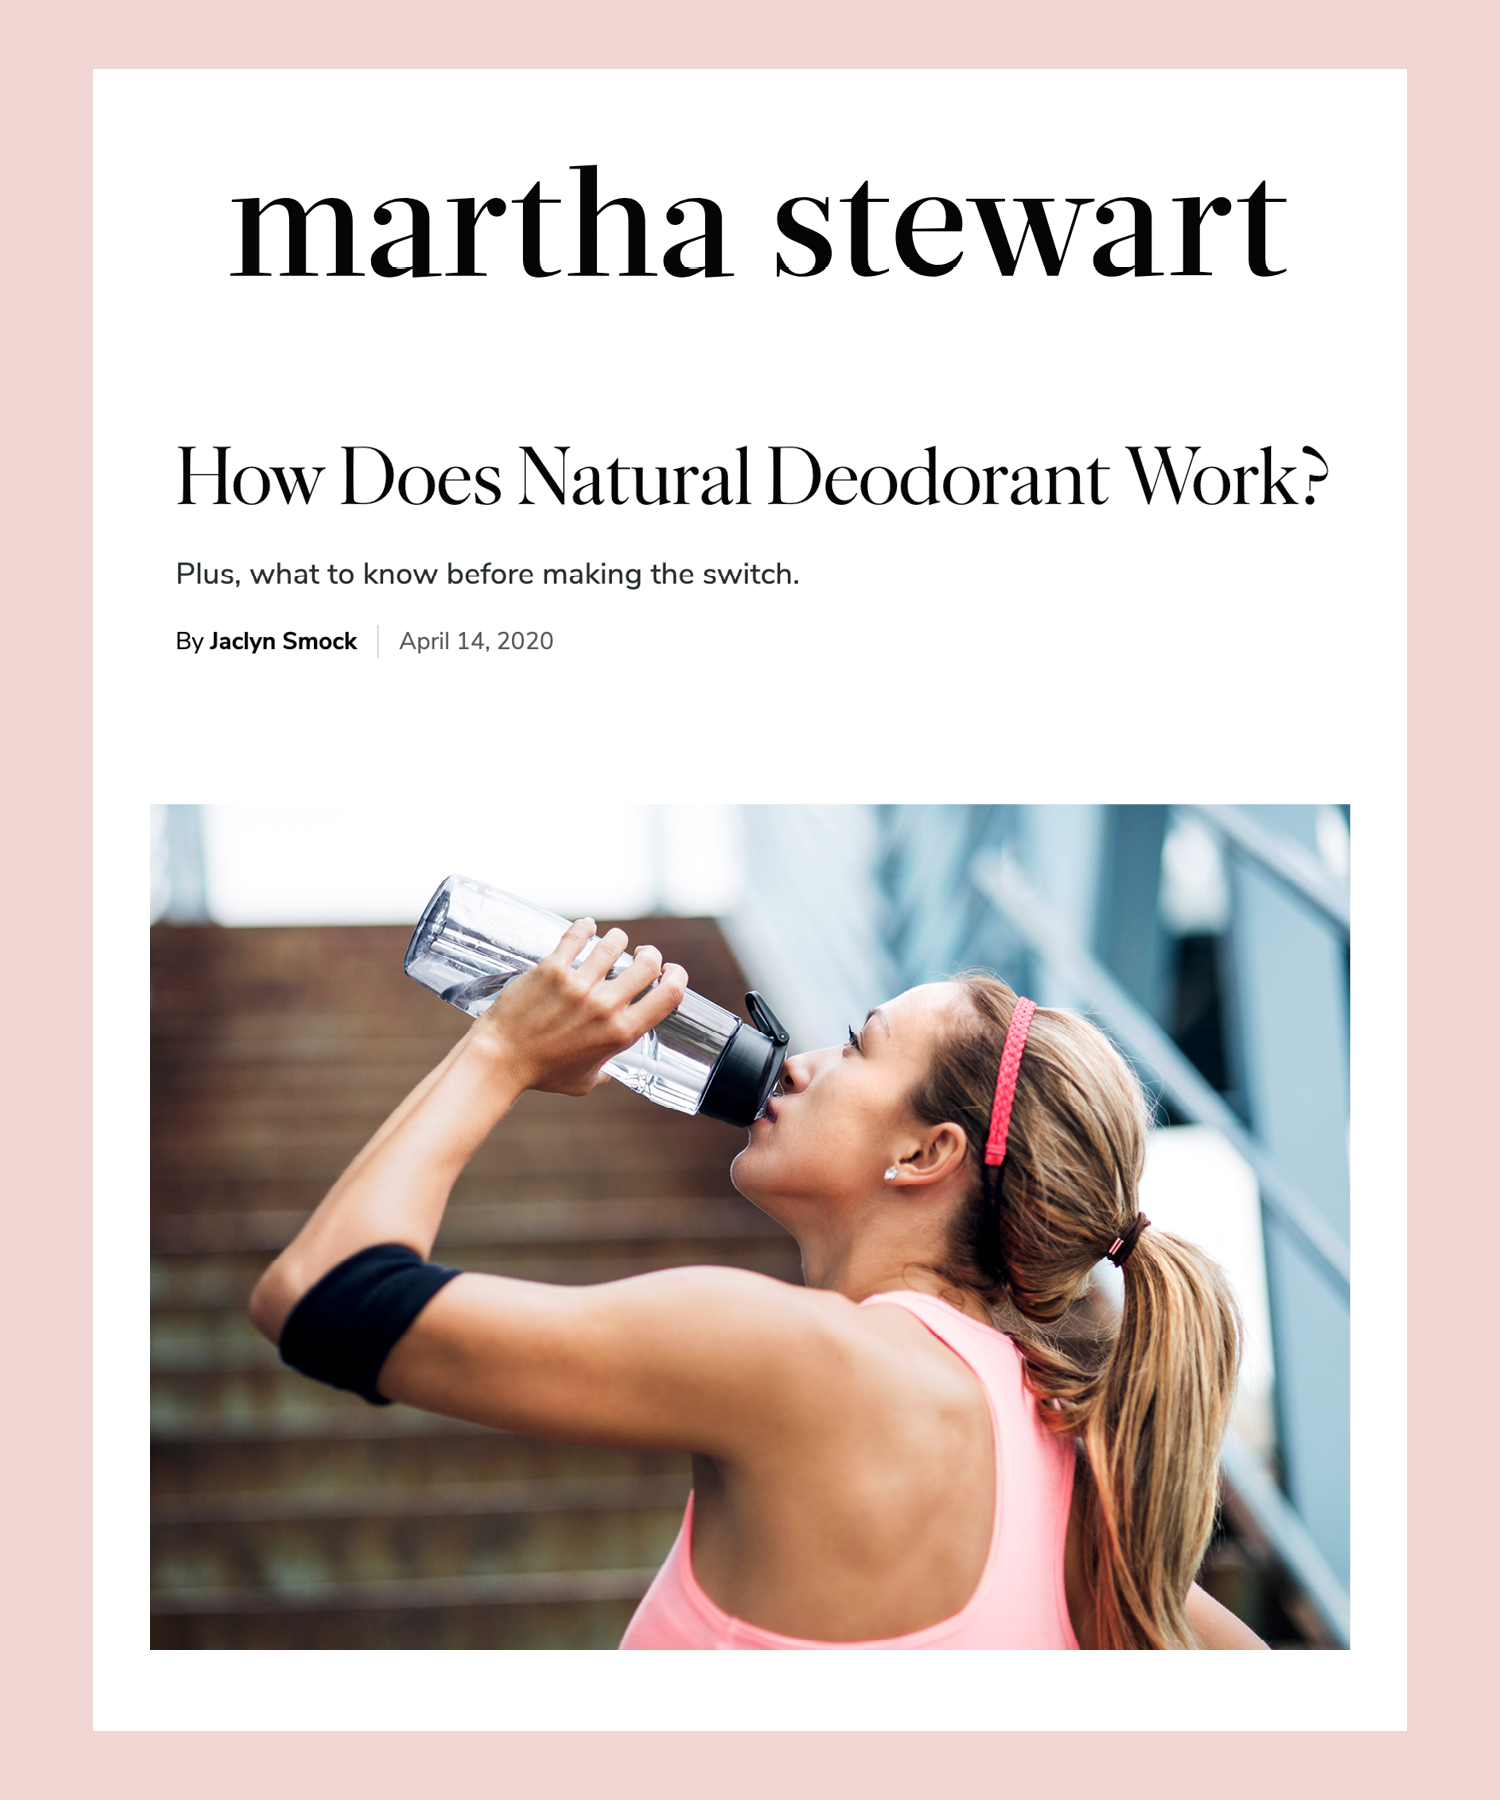 How Does Natural Deodorant Work?